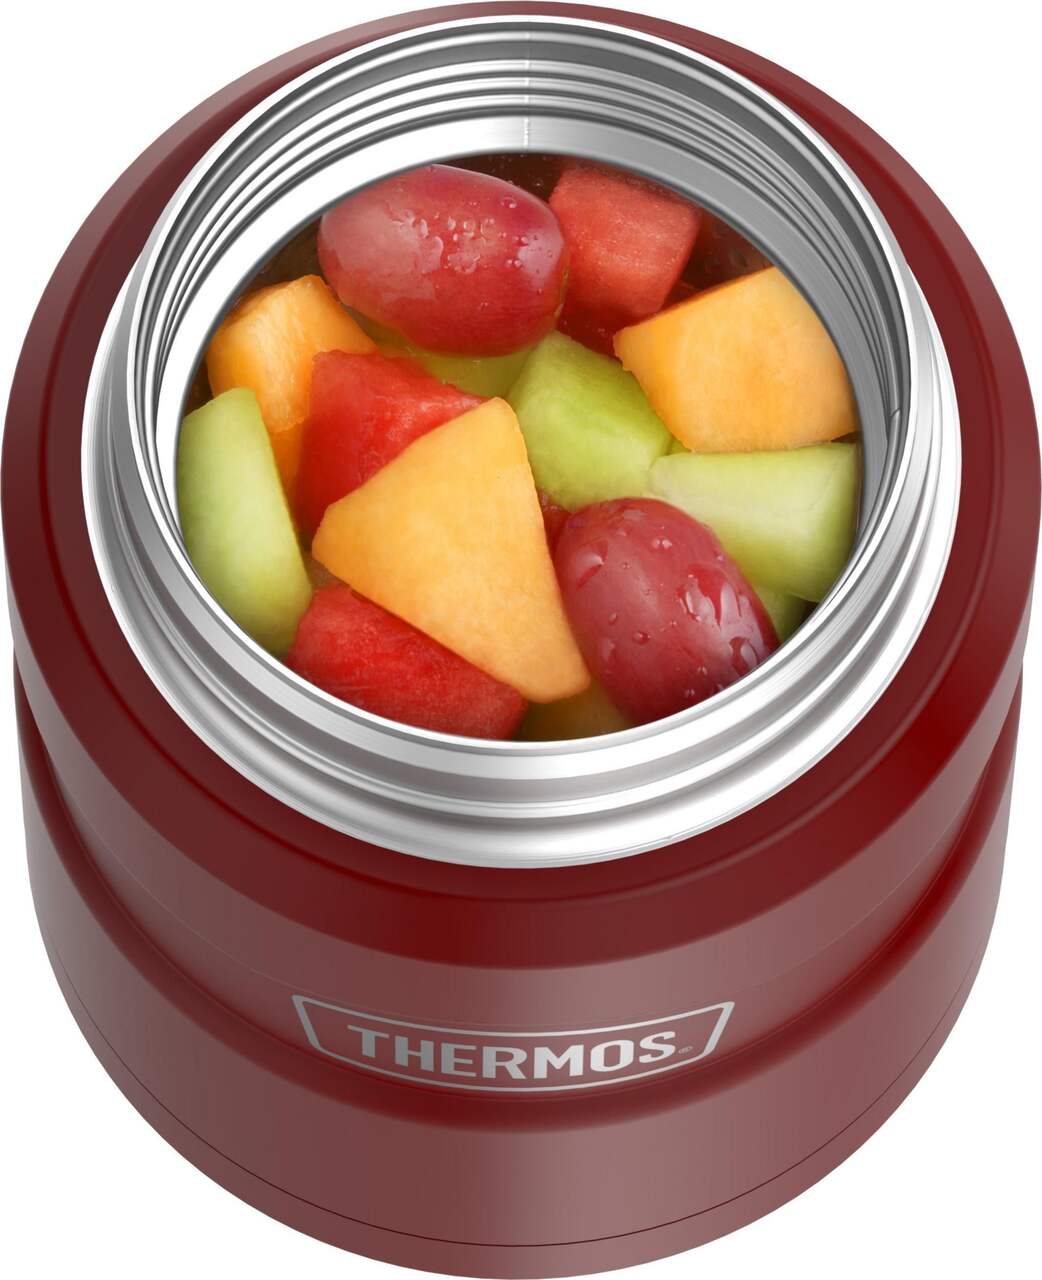 https://media-www.canadiantire.ca/product/living/kitchen/food-storage/1422106/thermos-stainless-steel-470-ml-king-food-jars-c40c6aad-34fc-4df3-813a-708149eb724b-jpgrendition.jpg?imdensity=1&imwidth=1244&impolicy=mZoom